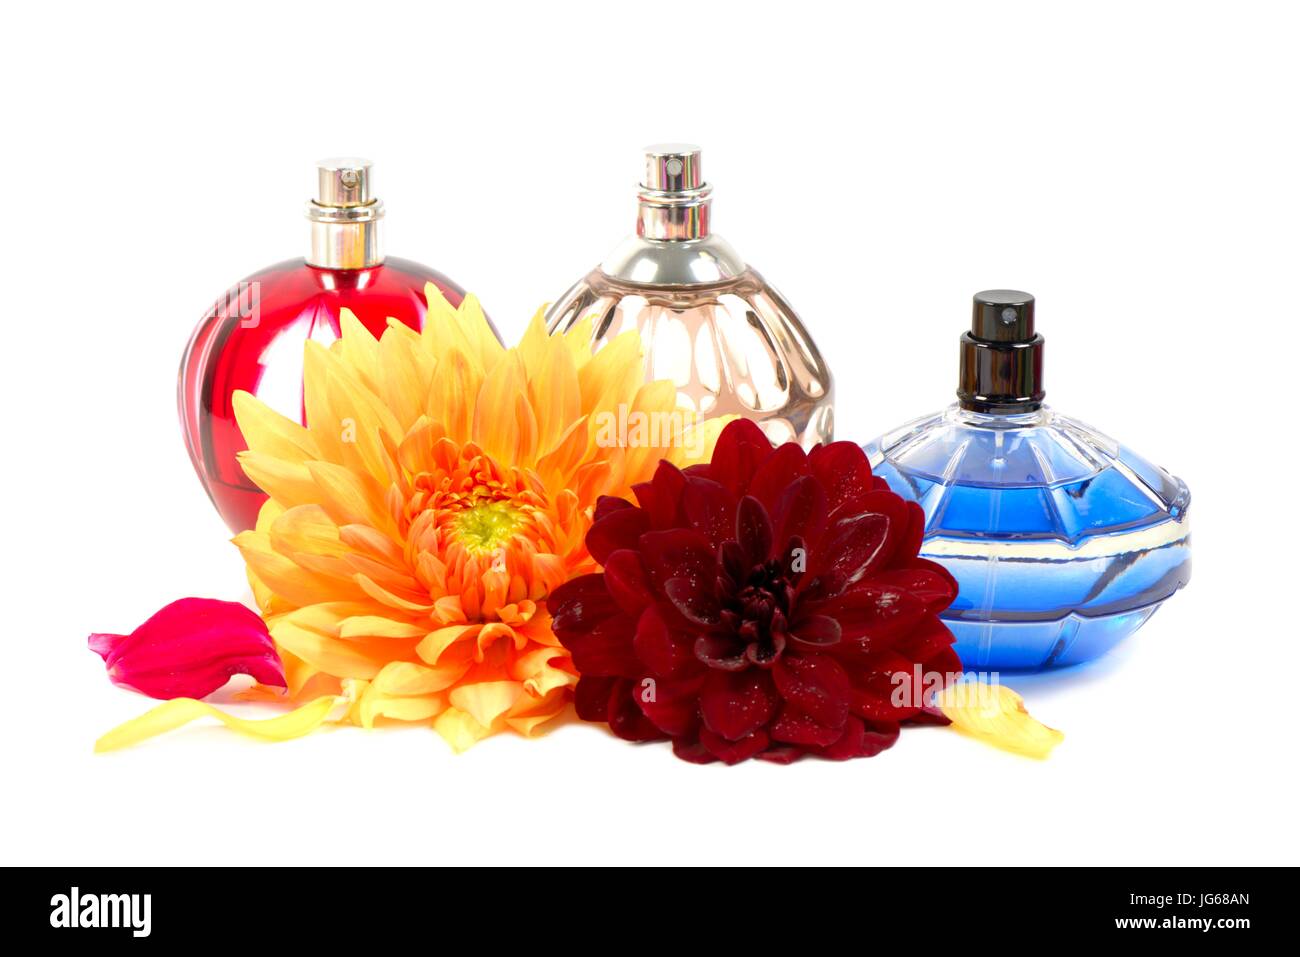 Perfume and flowers Stock Photo